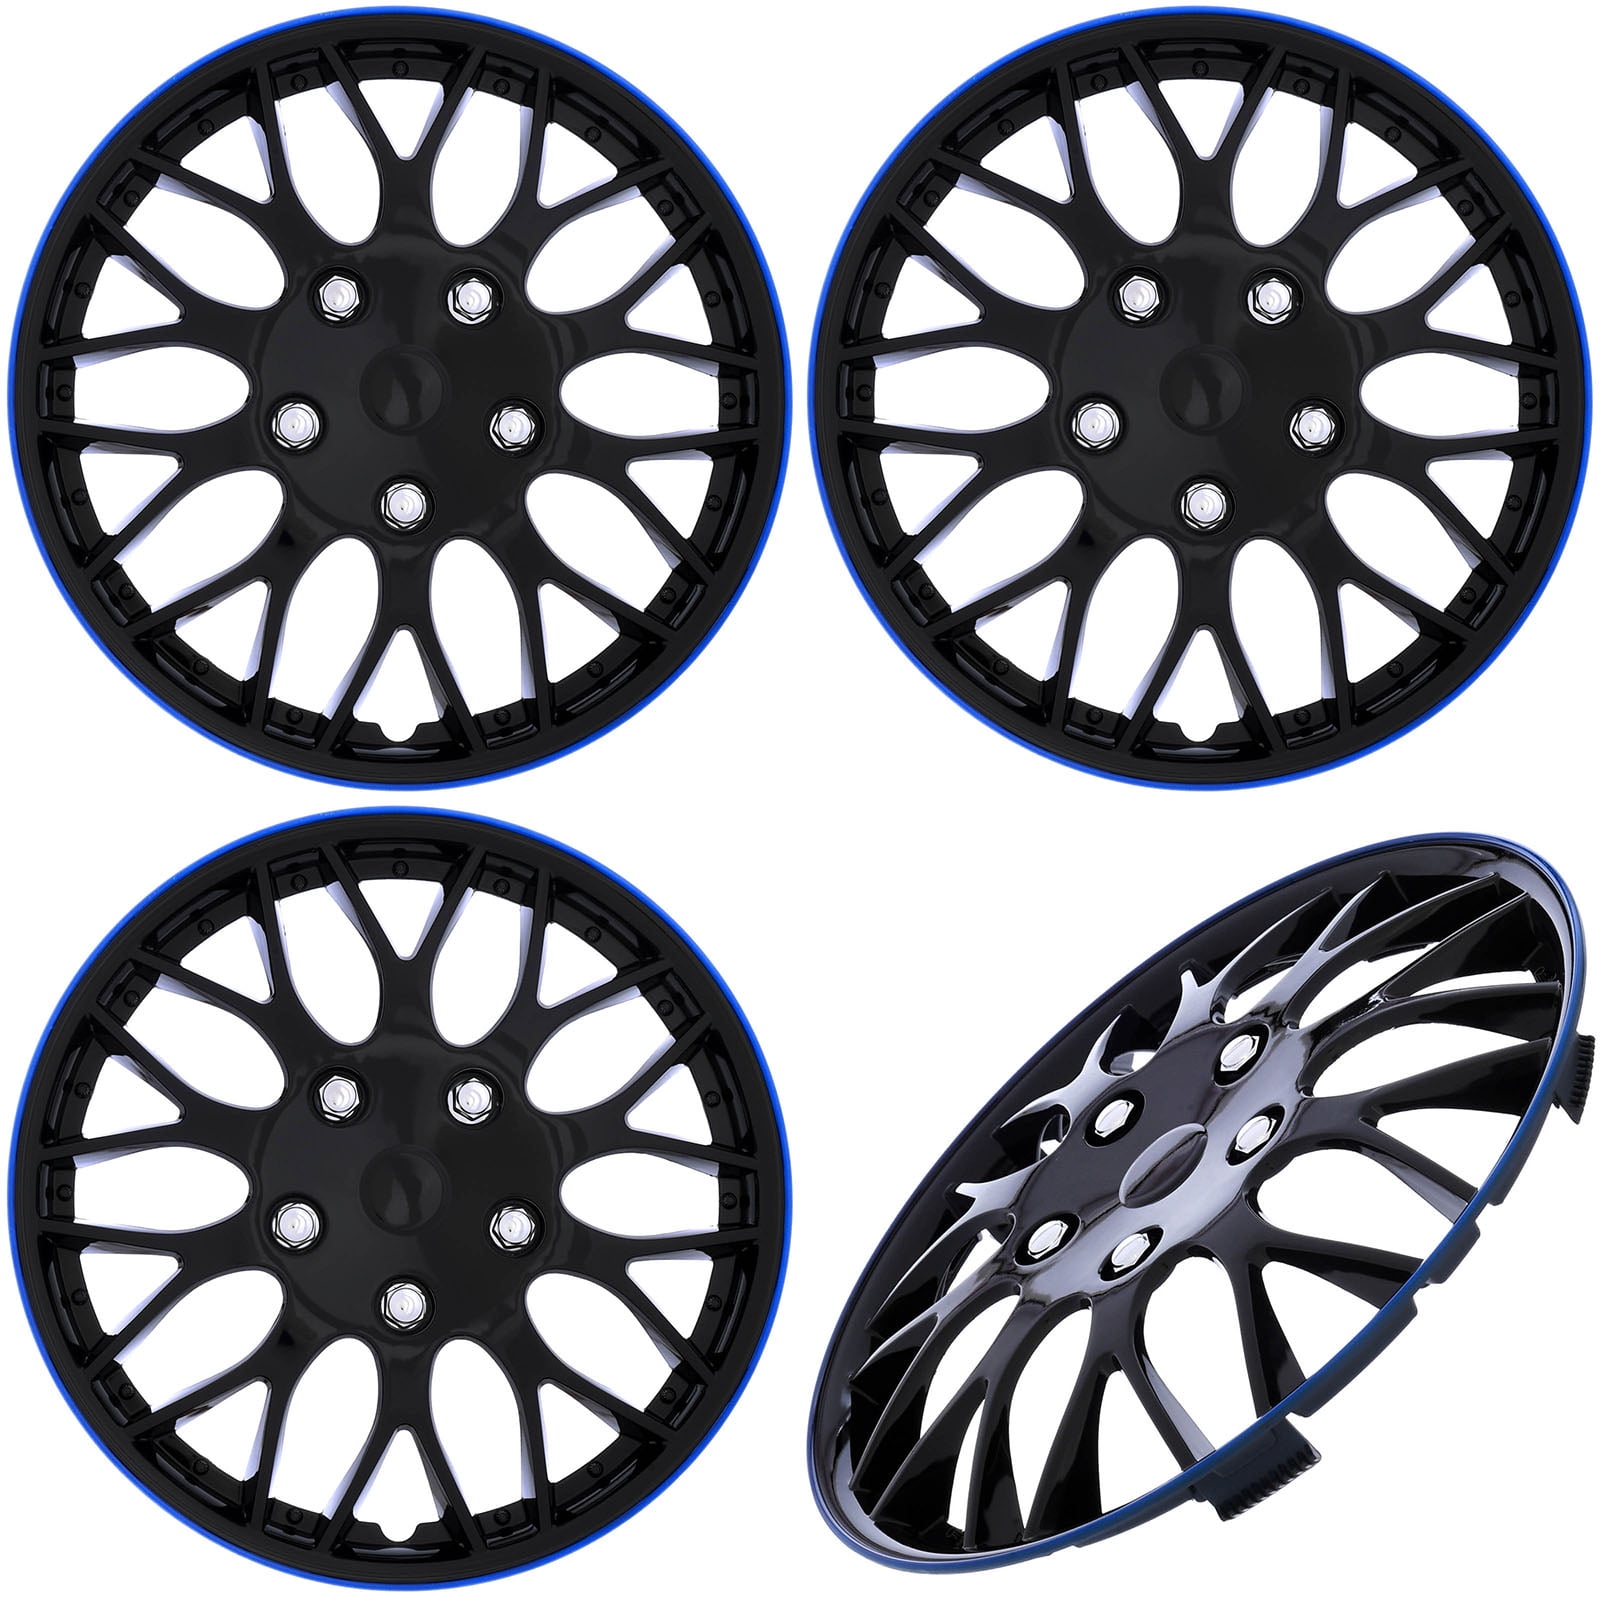 Details about   4pcs Wheel Cover Rim Skin Covers 15" Inch Style #B868 Hubcaps with Improved Tab